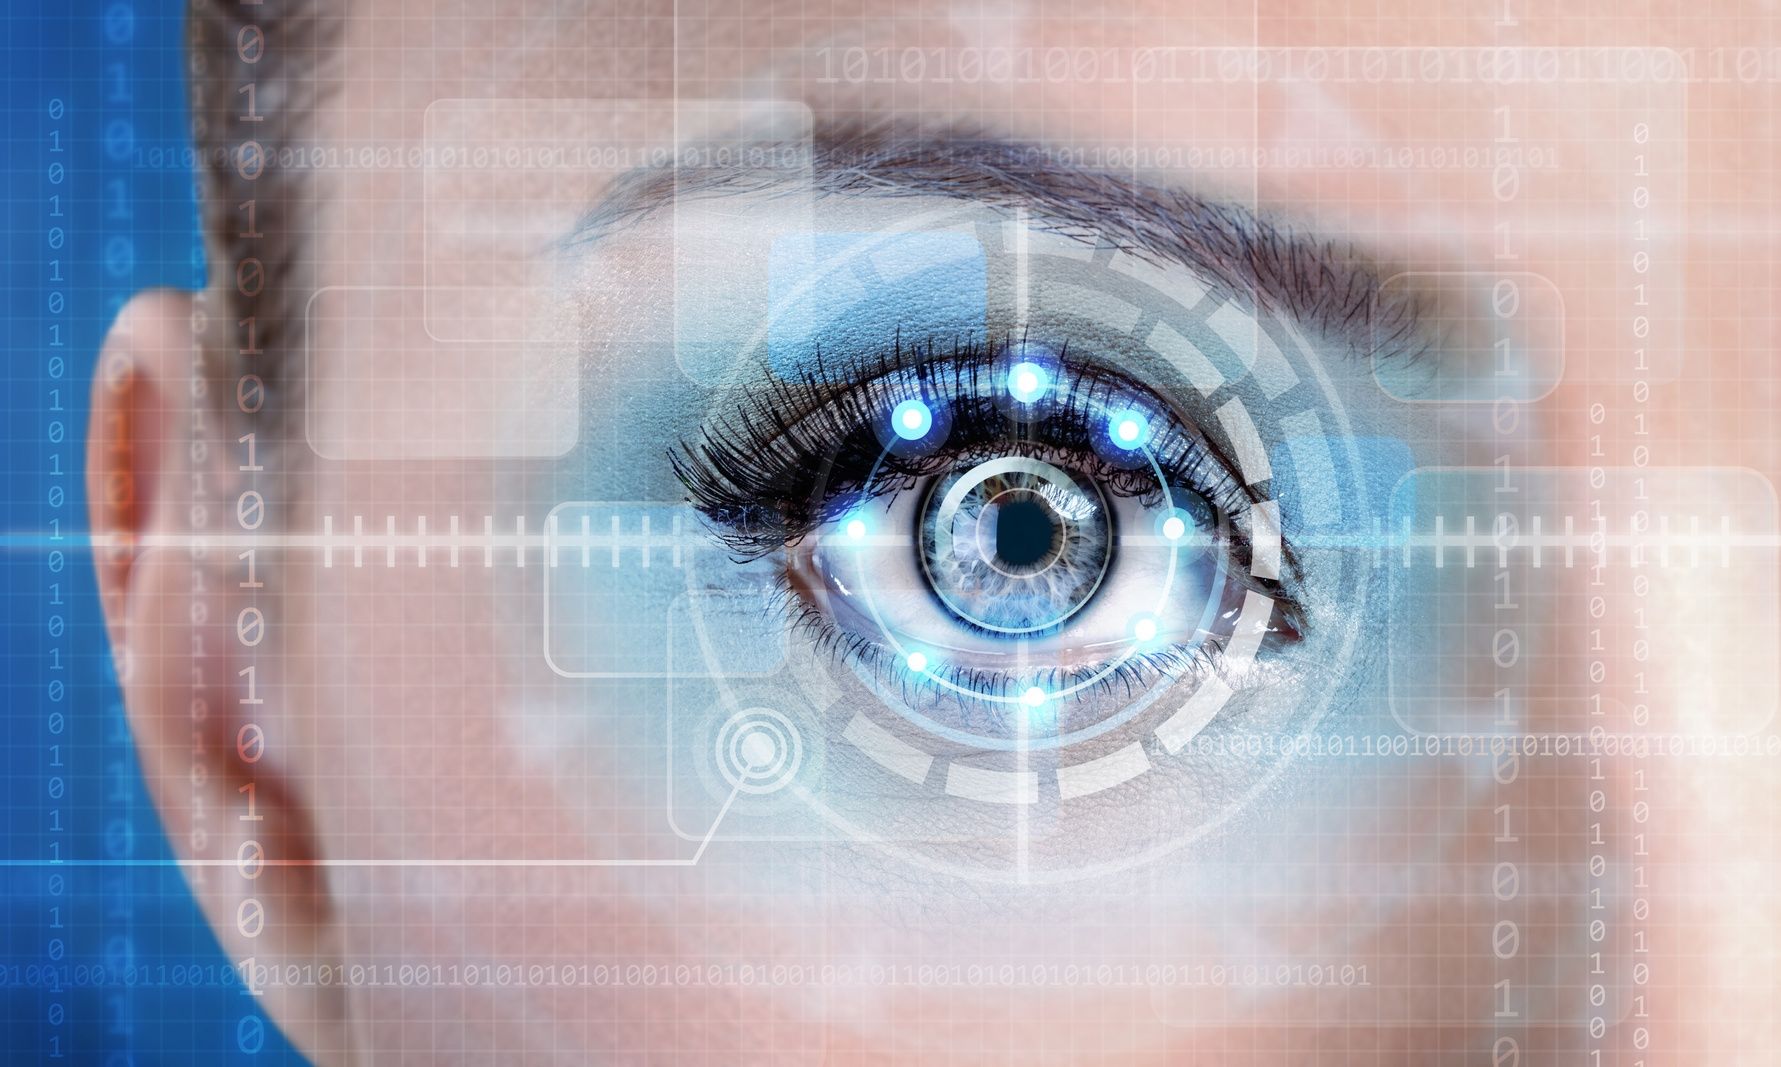 Eye-tracking marketing research in China